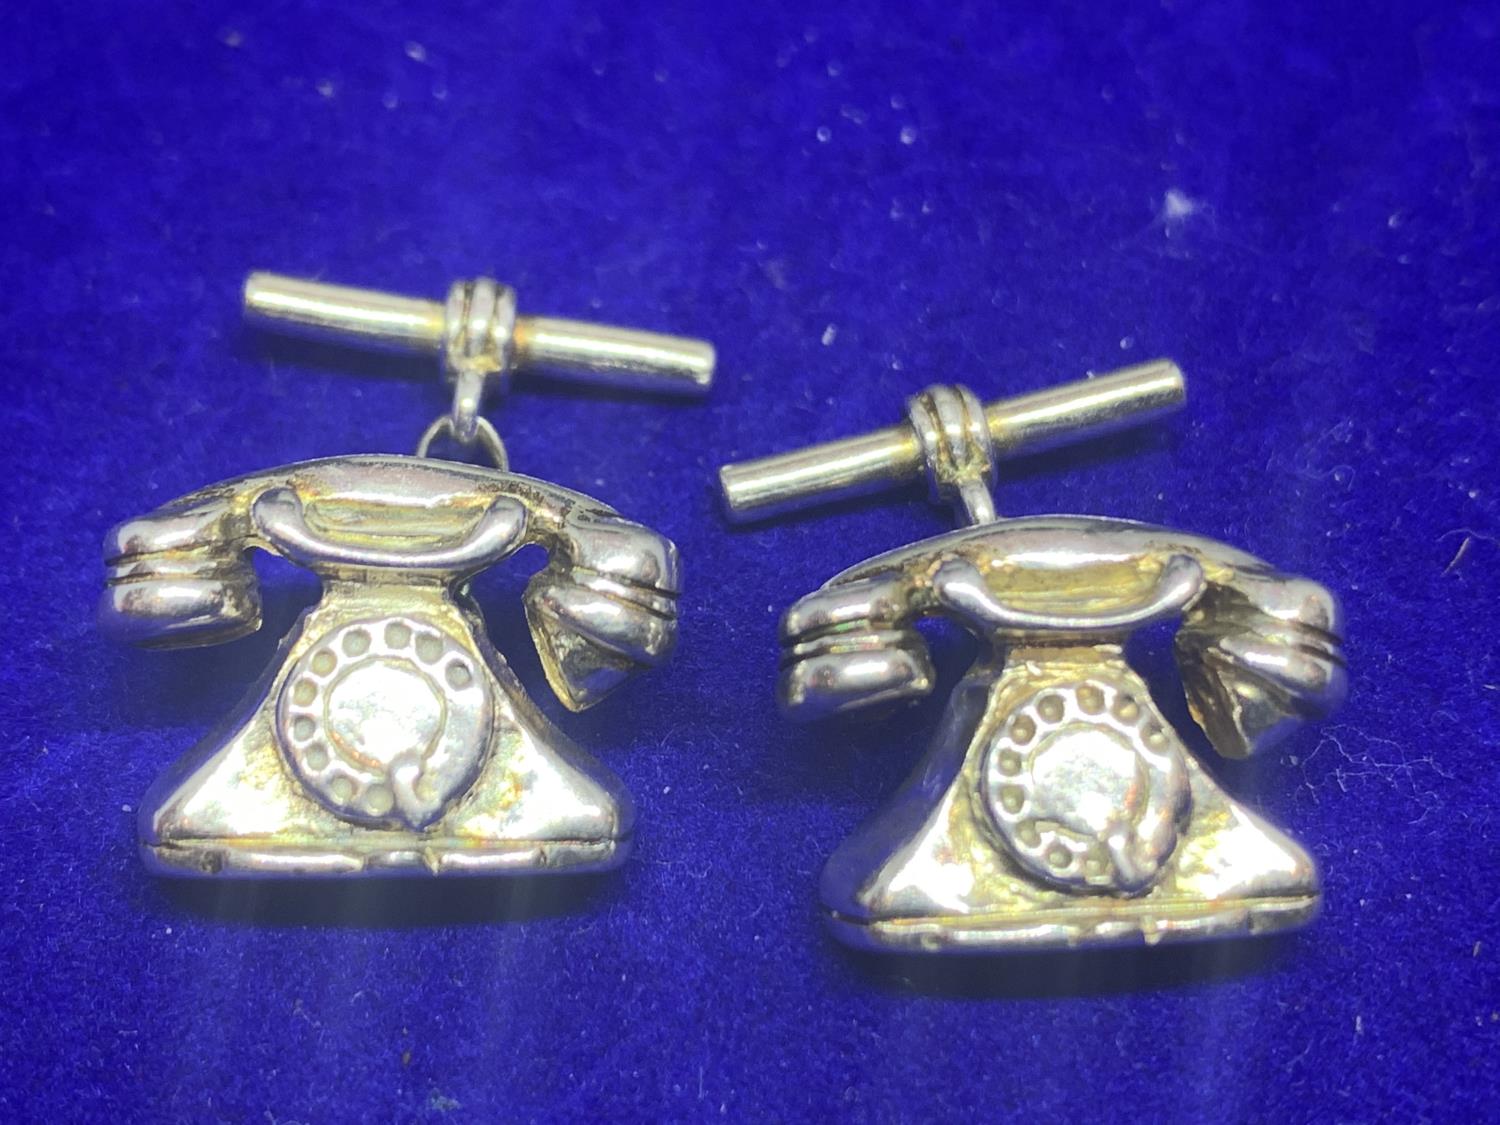 A PAIR OF HALLMARKED SILVER TELEPHONE STYLE CUFF LINKS IN A PRESENTATION BOX - Image 2 of 3